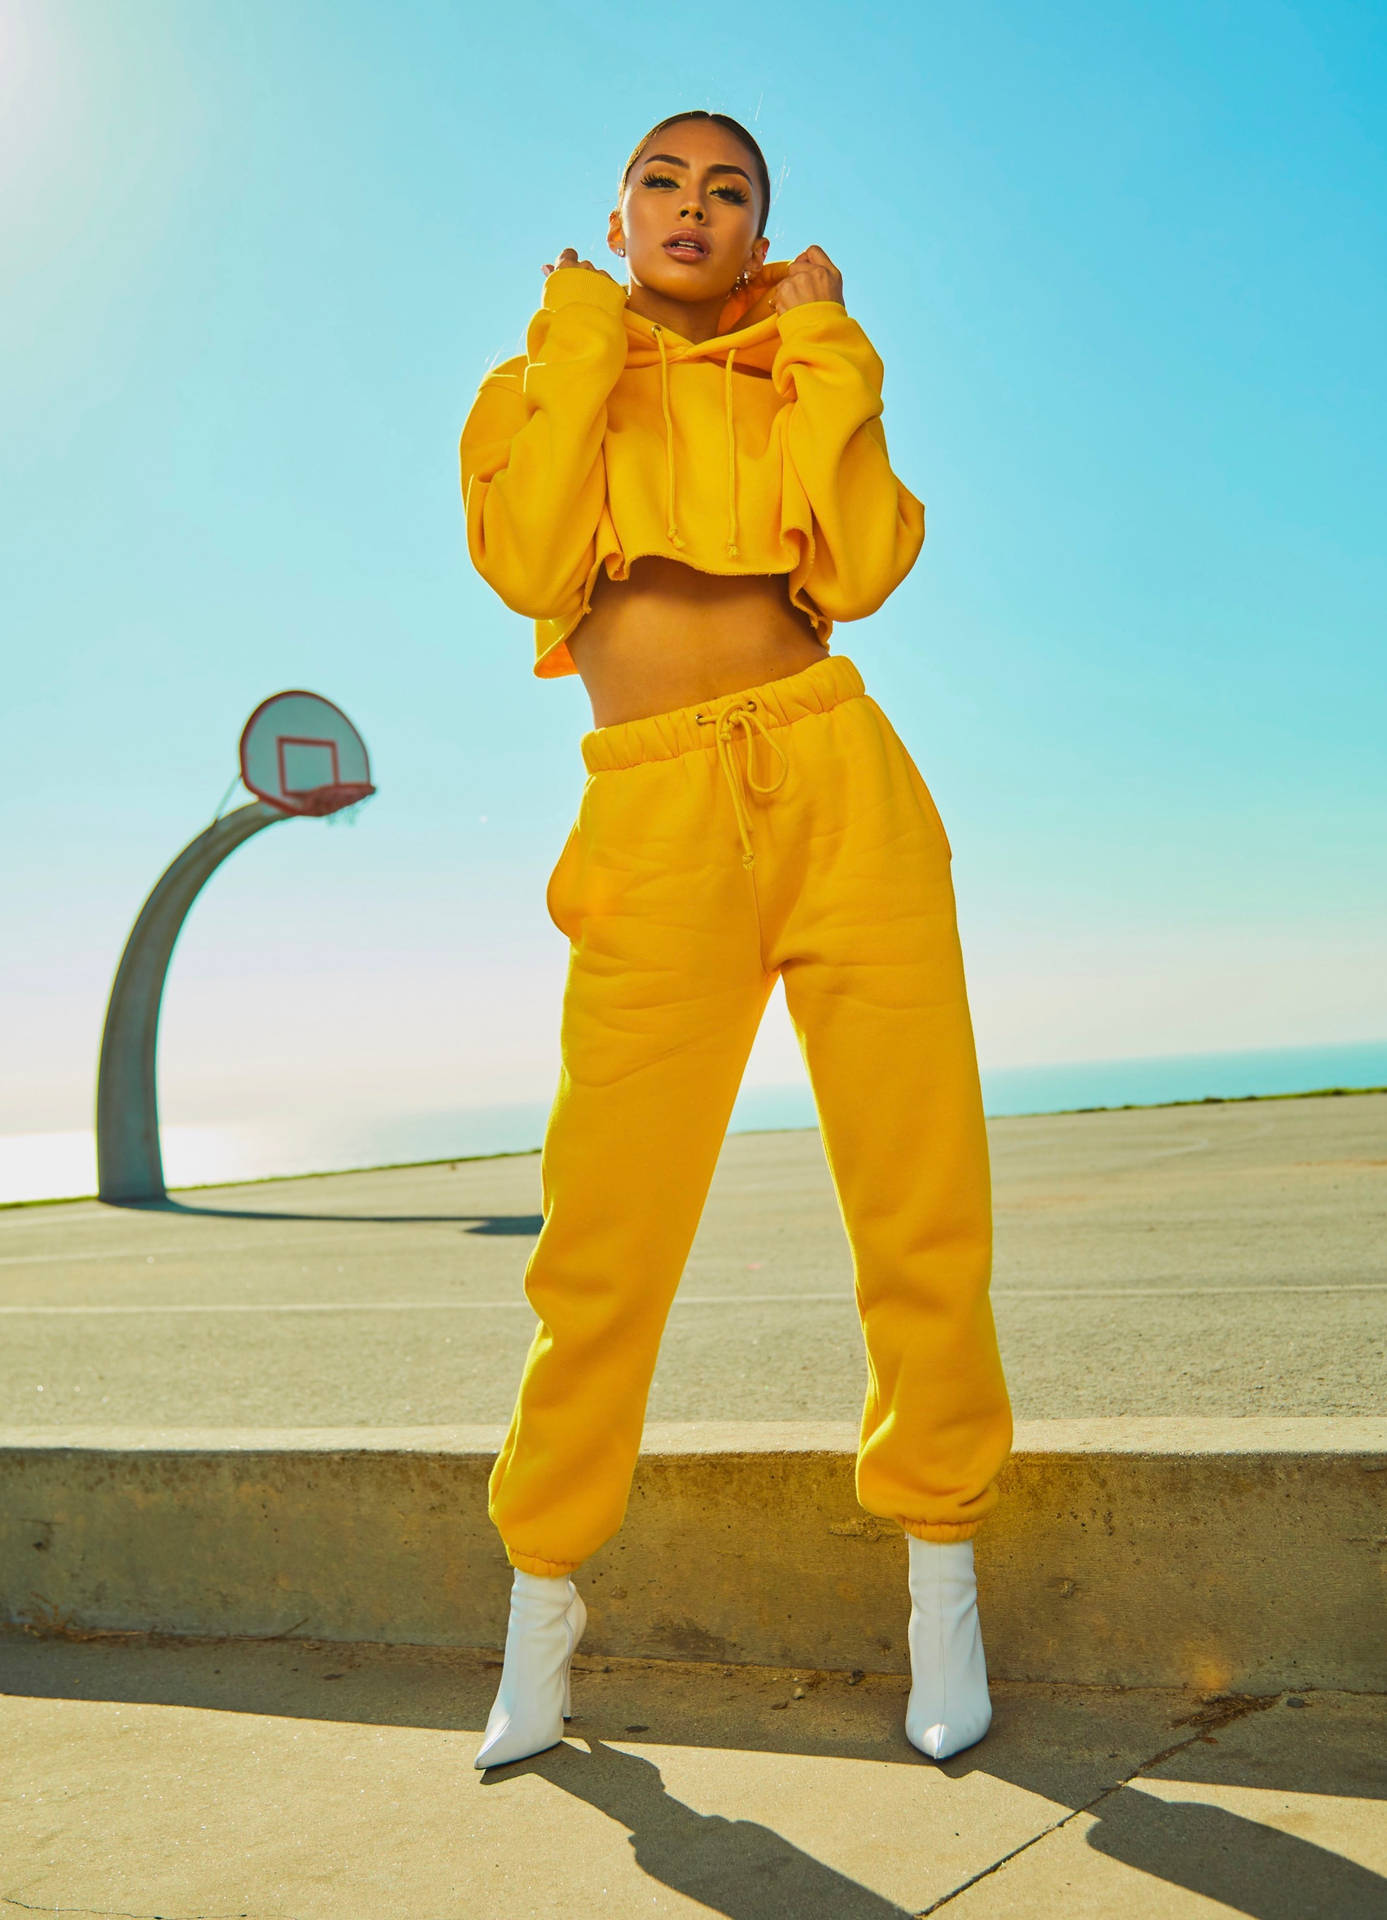 "The Yellow of Hypebeast Fashion" Wallpaper